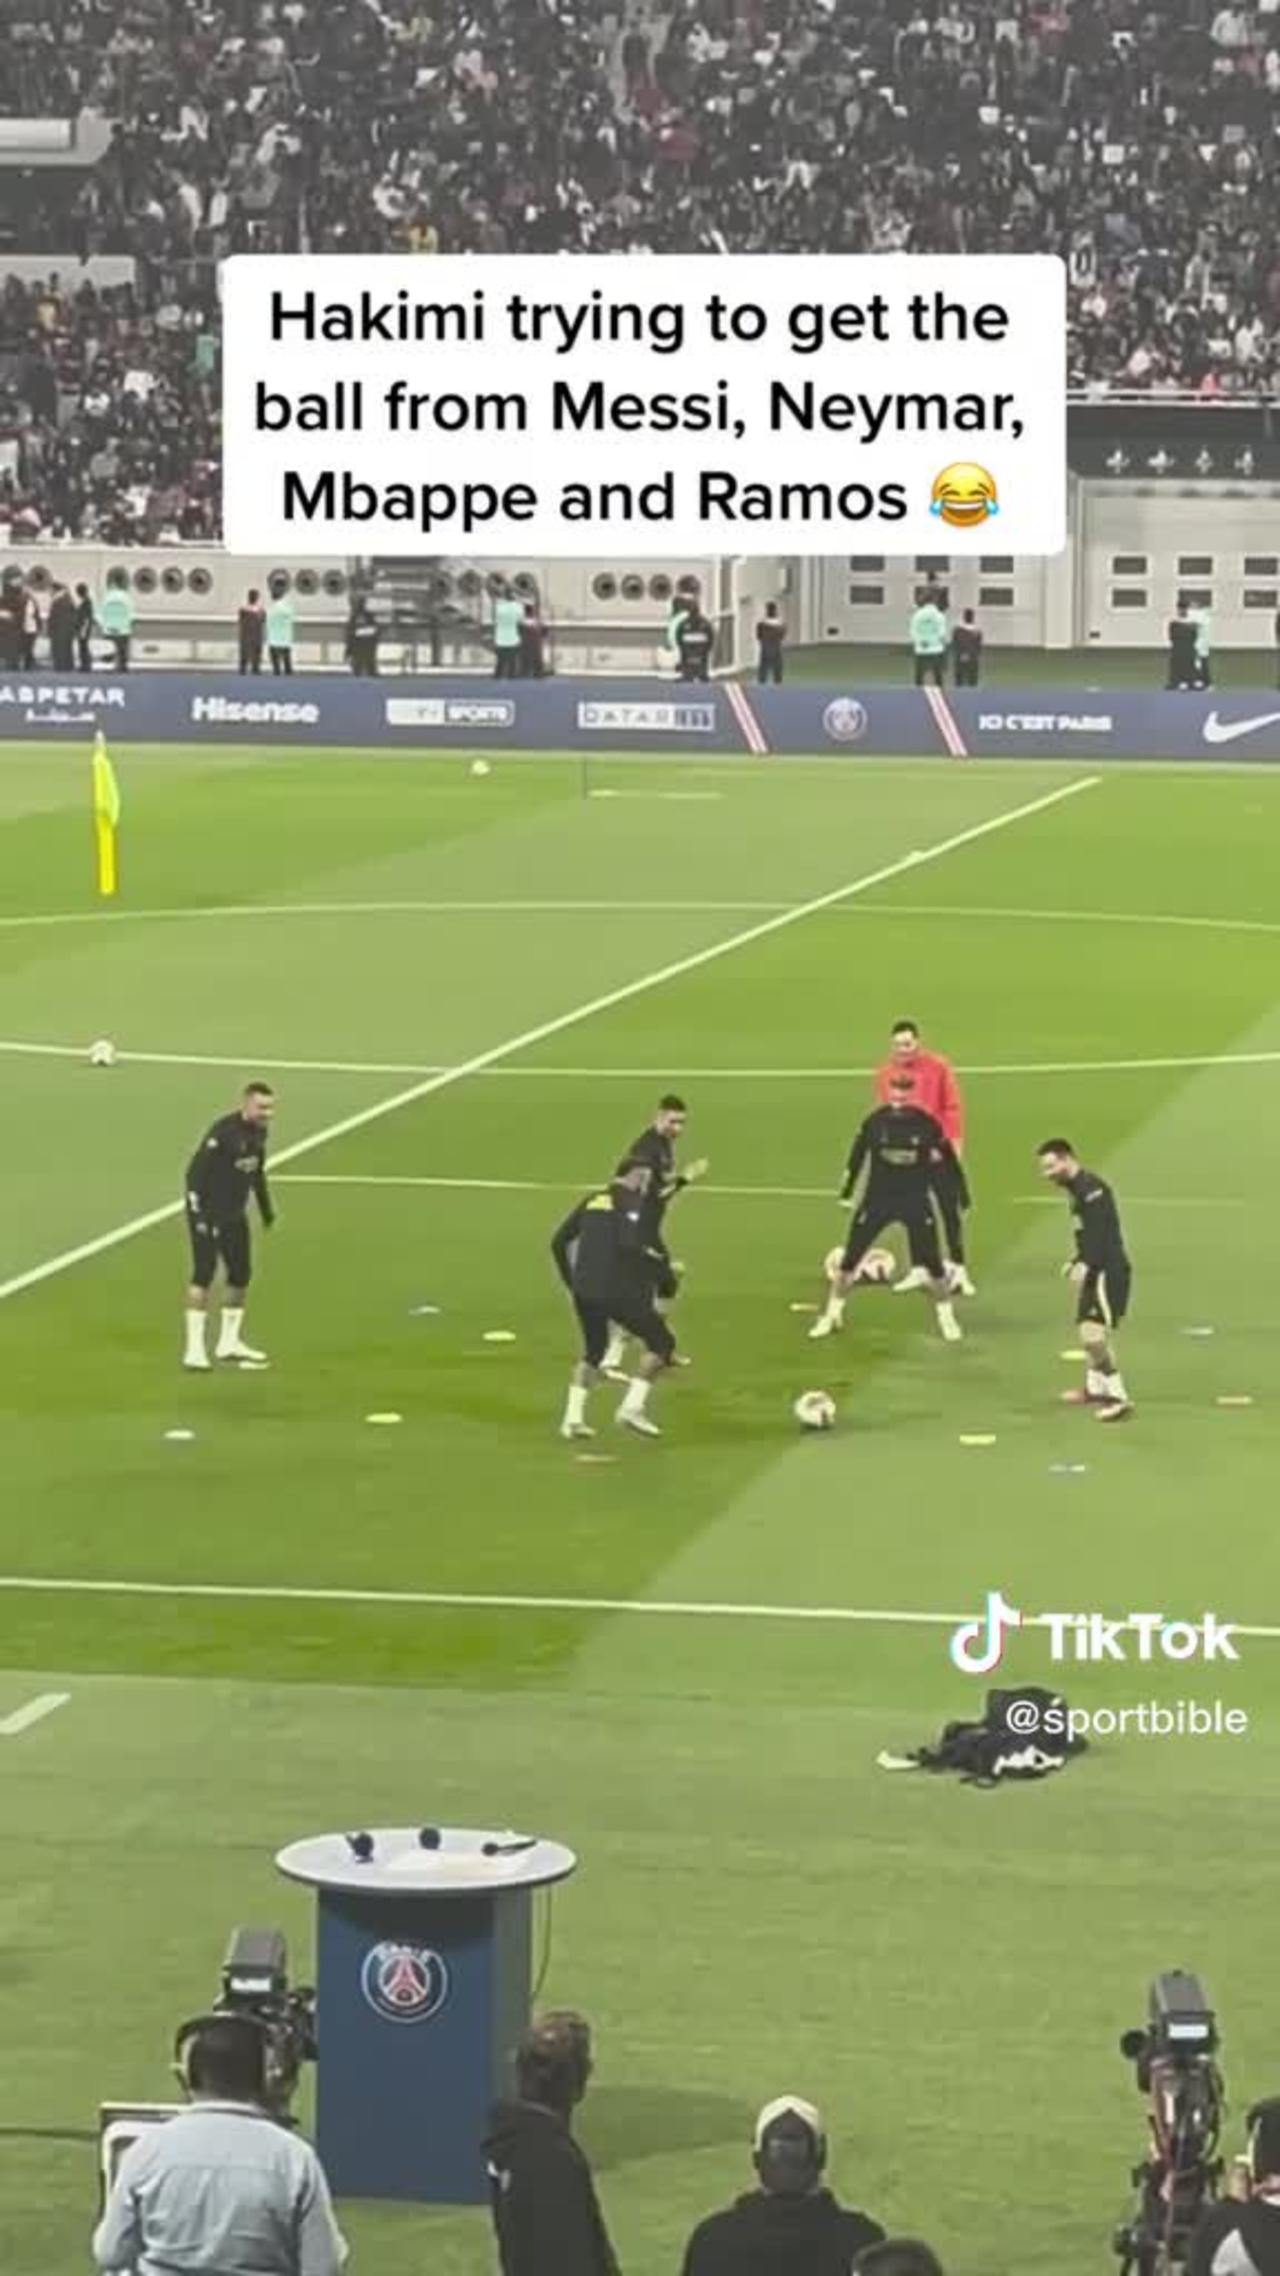 Hakim trying to get the ball from Messi,Neymar,Mbappe and Ramos